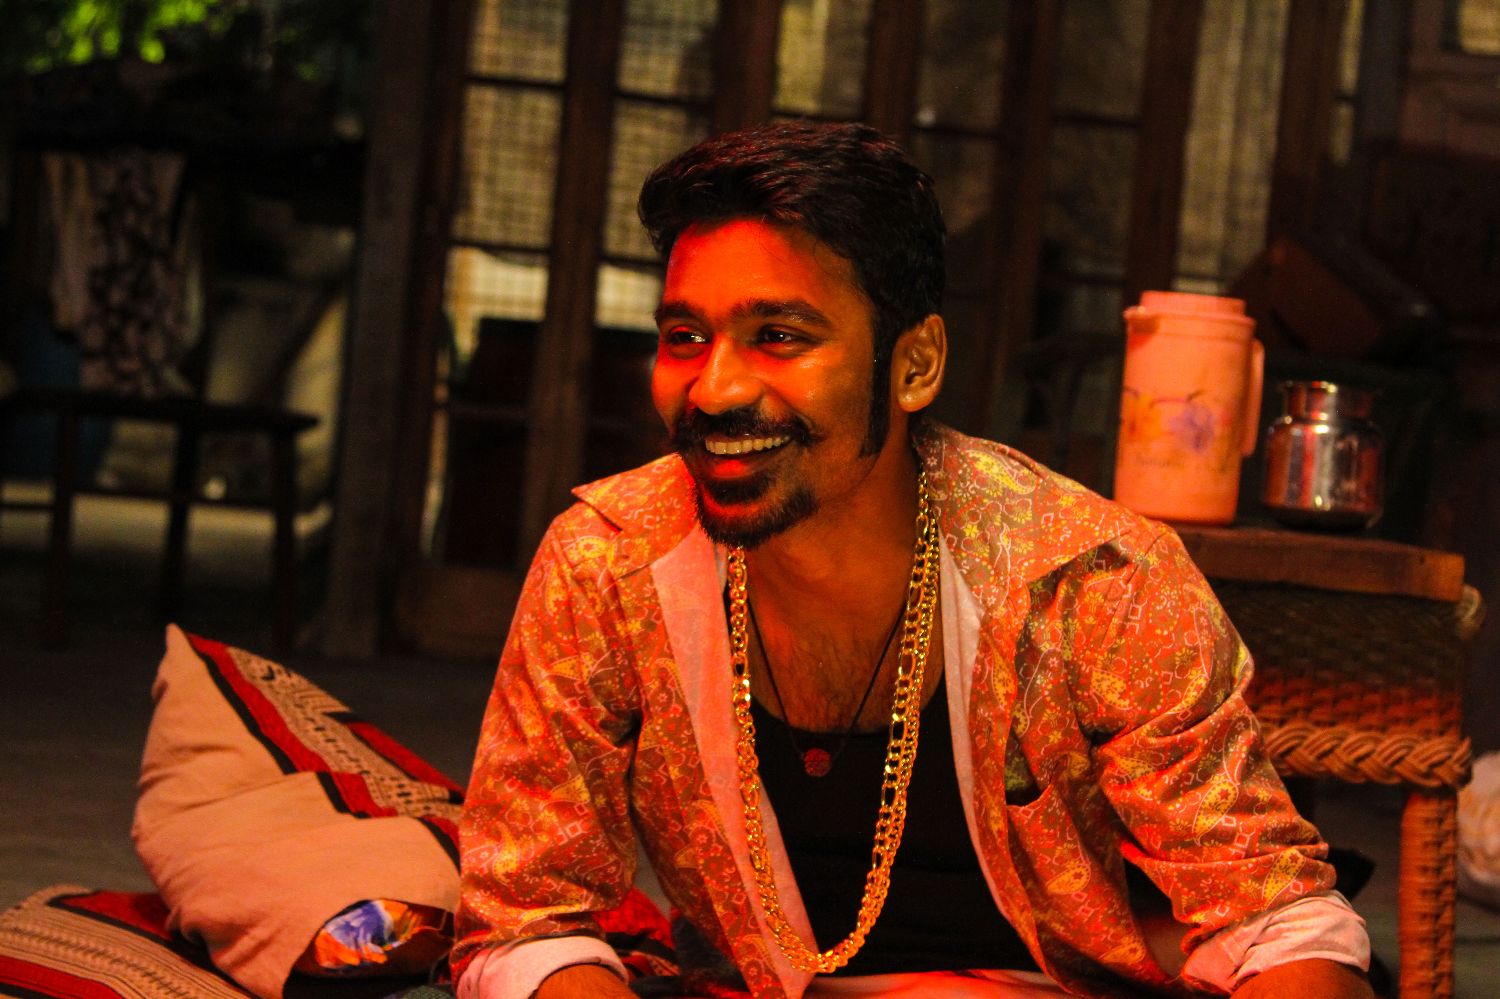 Dhanush On Co-Starring With Rajinikanth In A Film: 'Hope It Happens One Day'